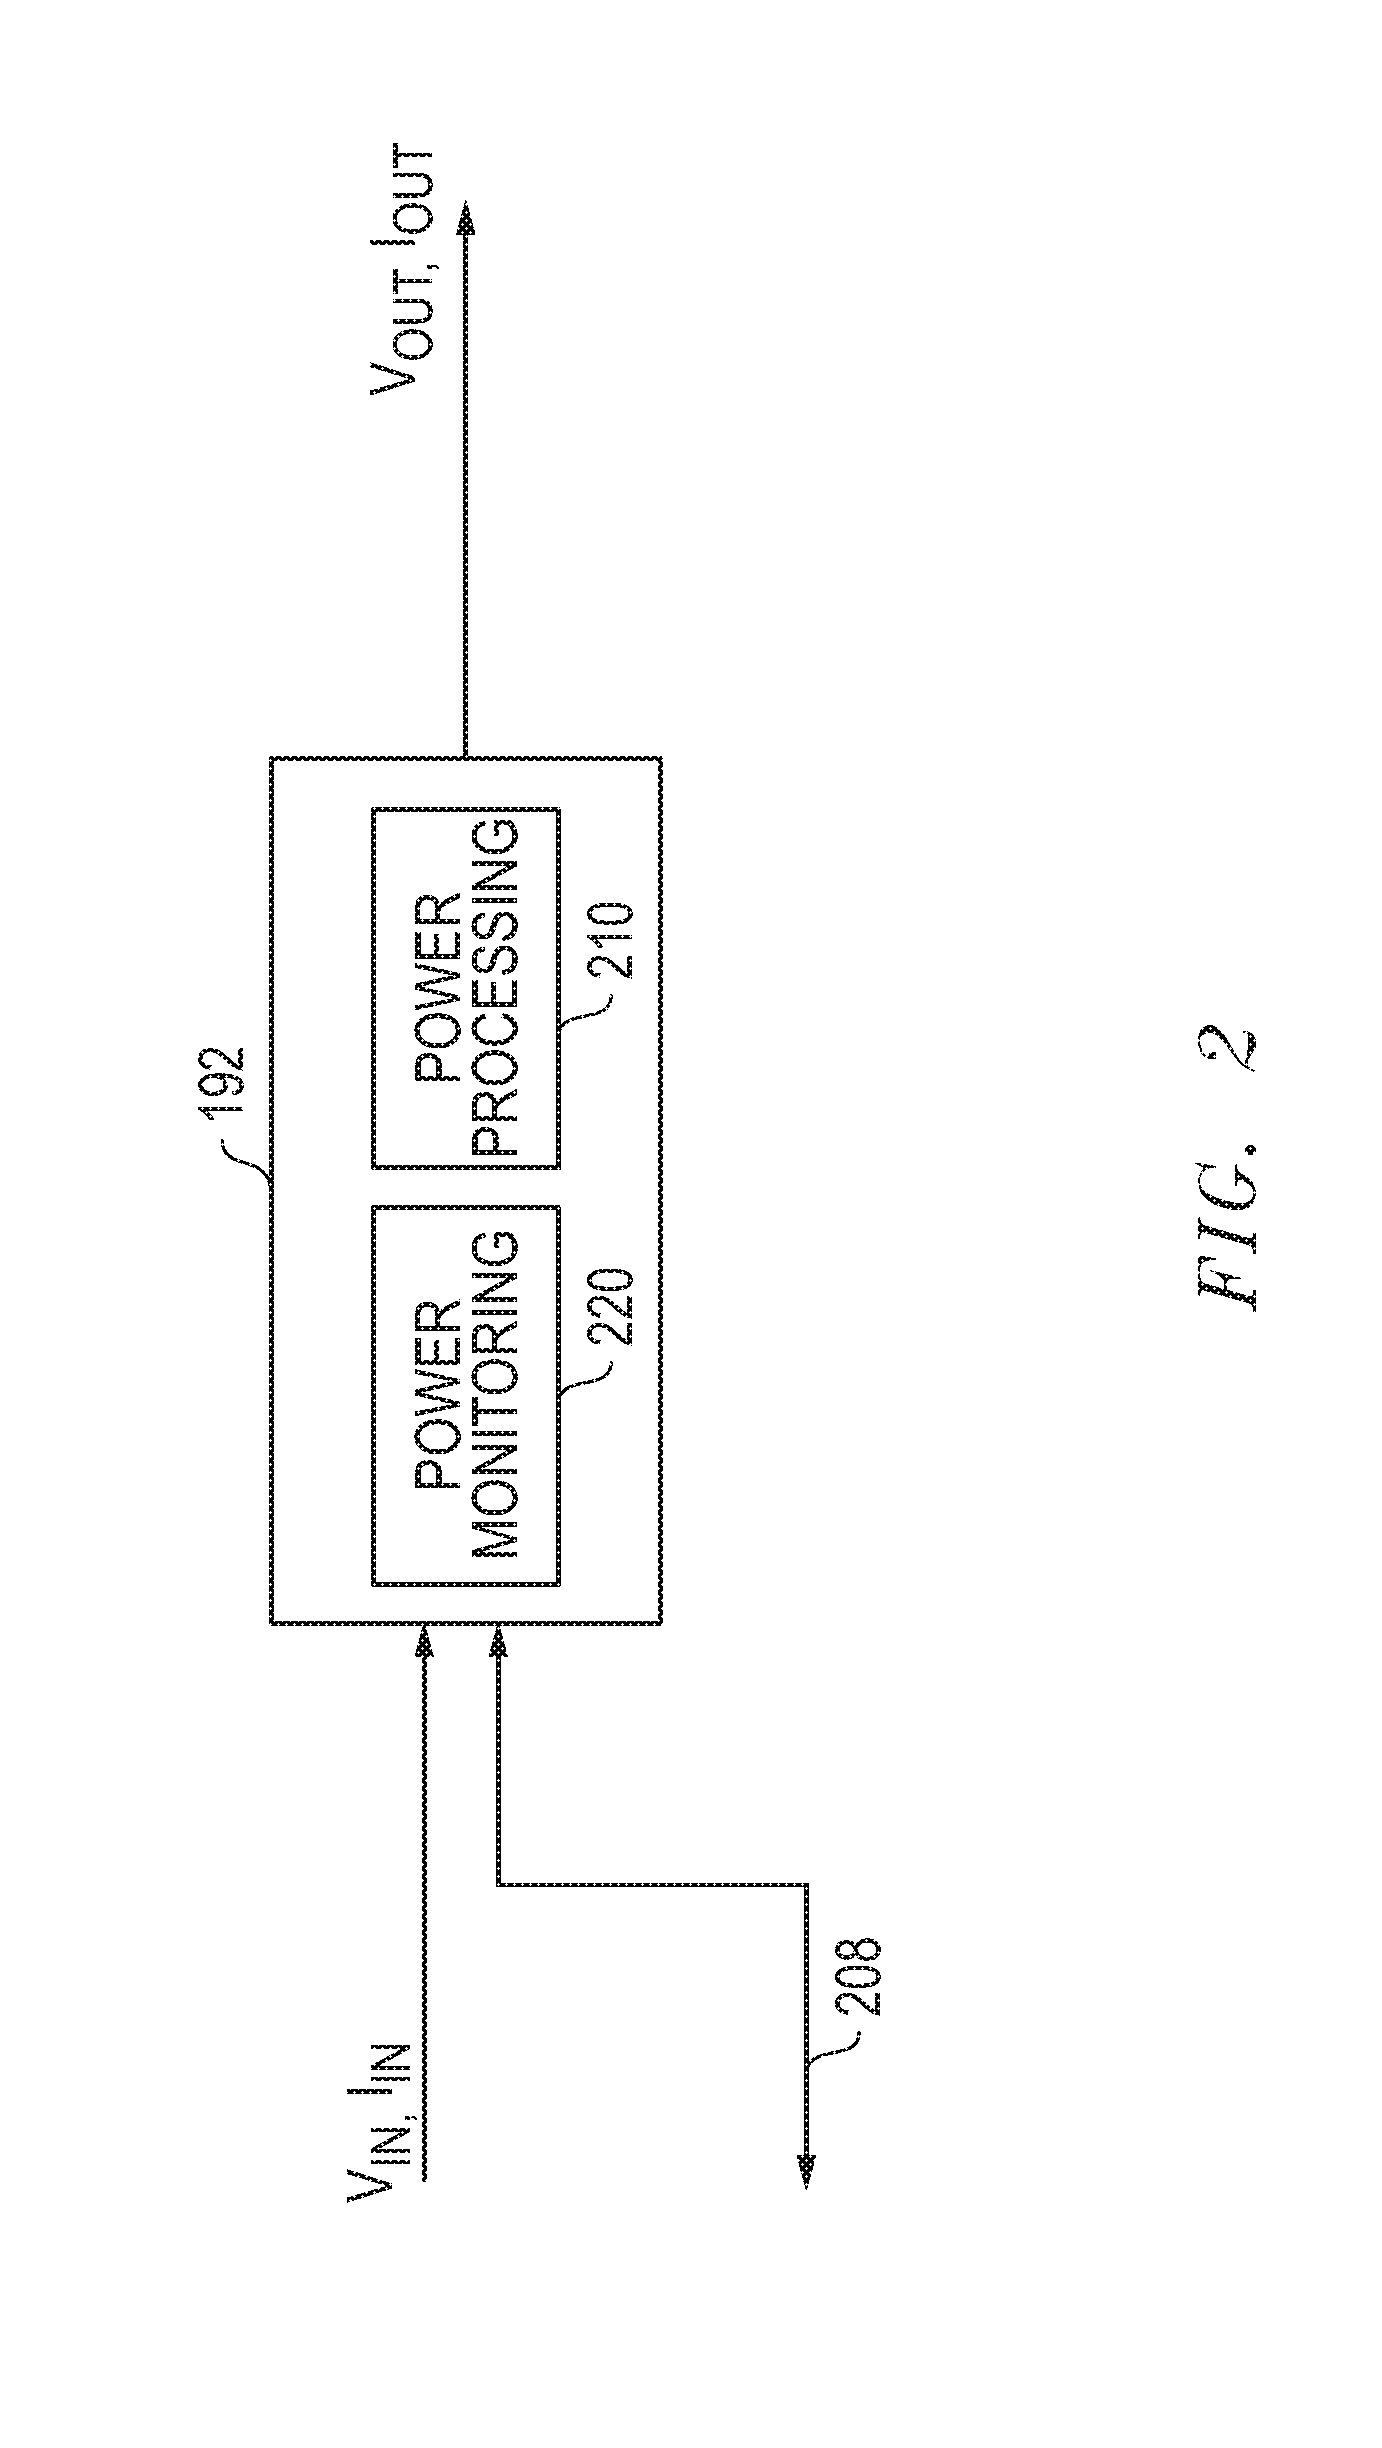 Systems and methods for dynamic management of switching frequency for voltage regulation